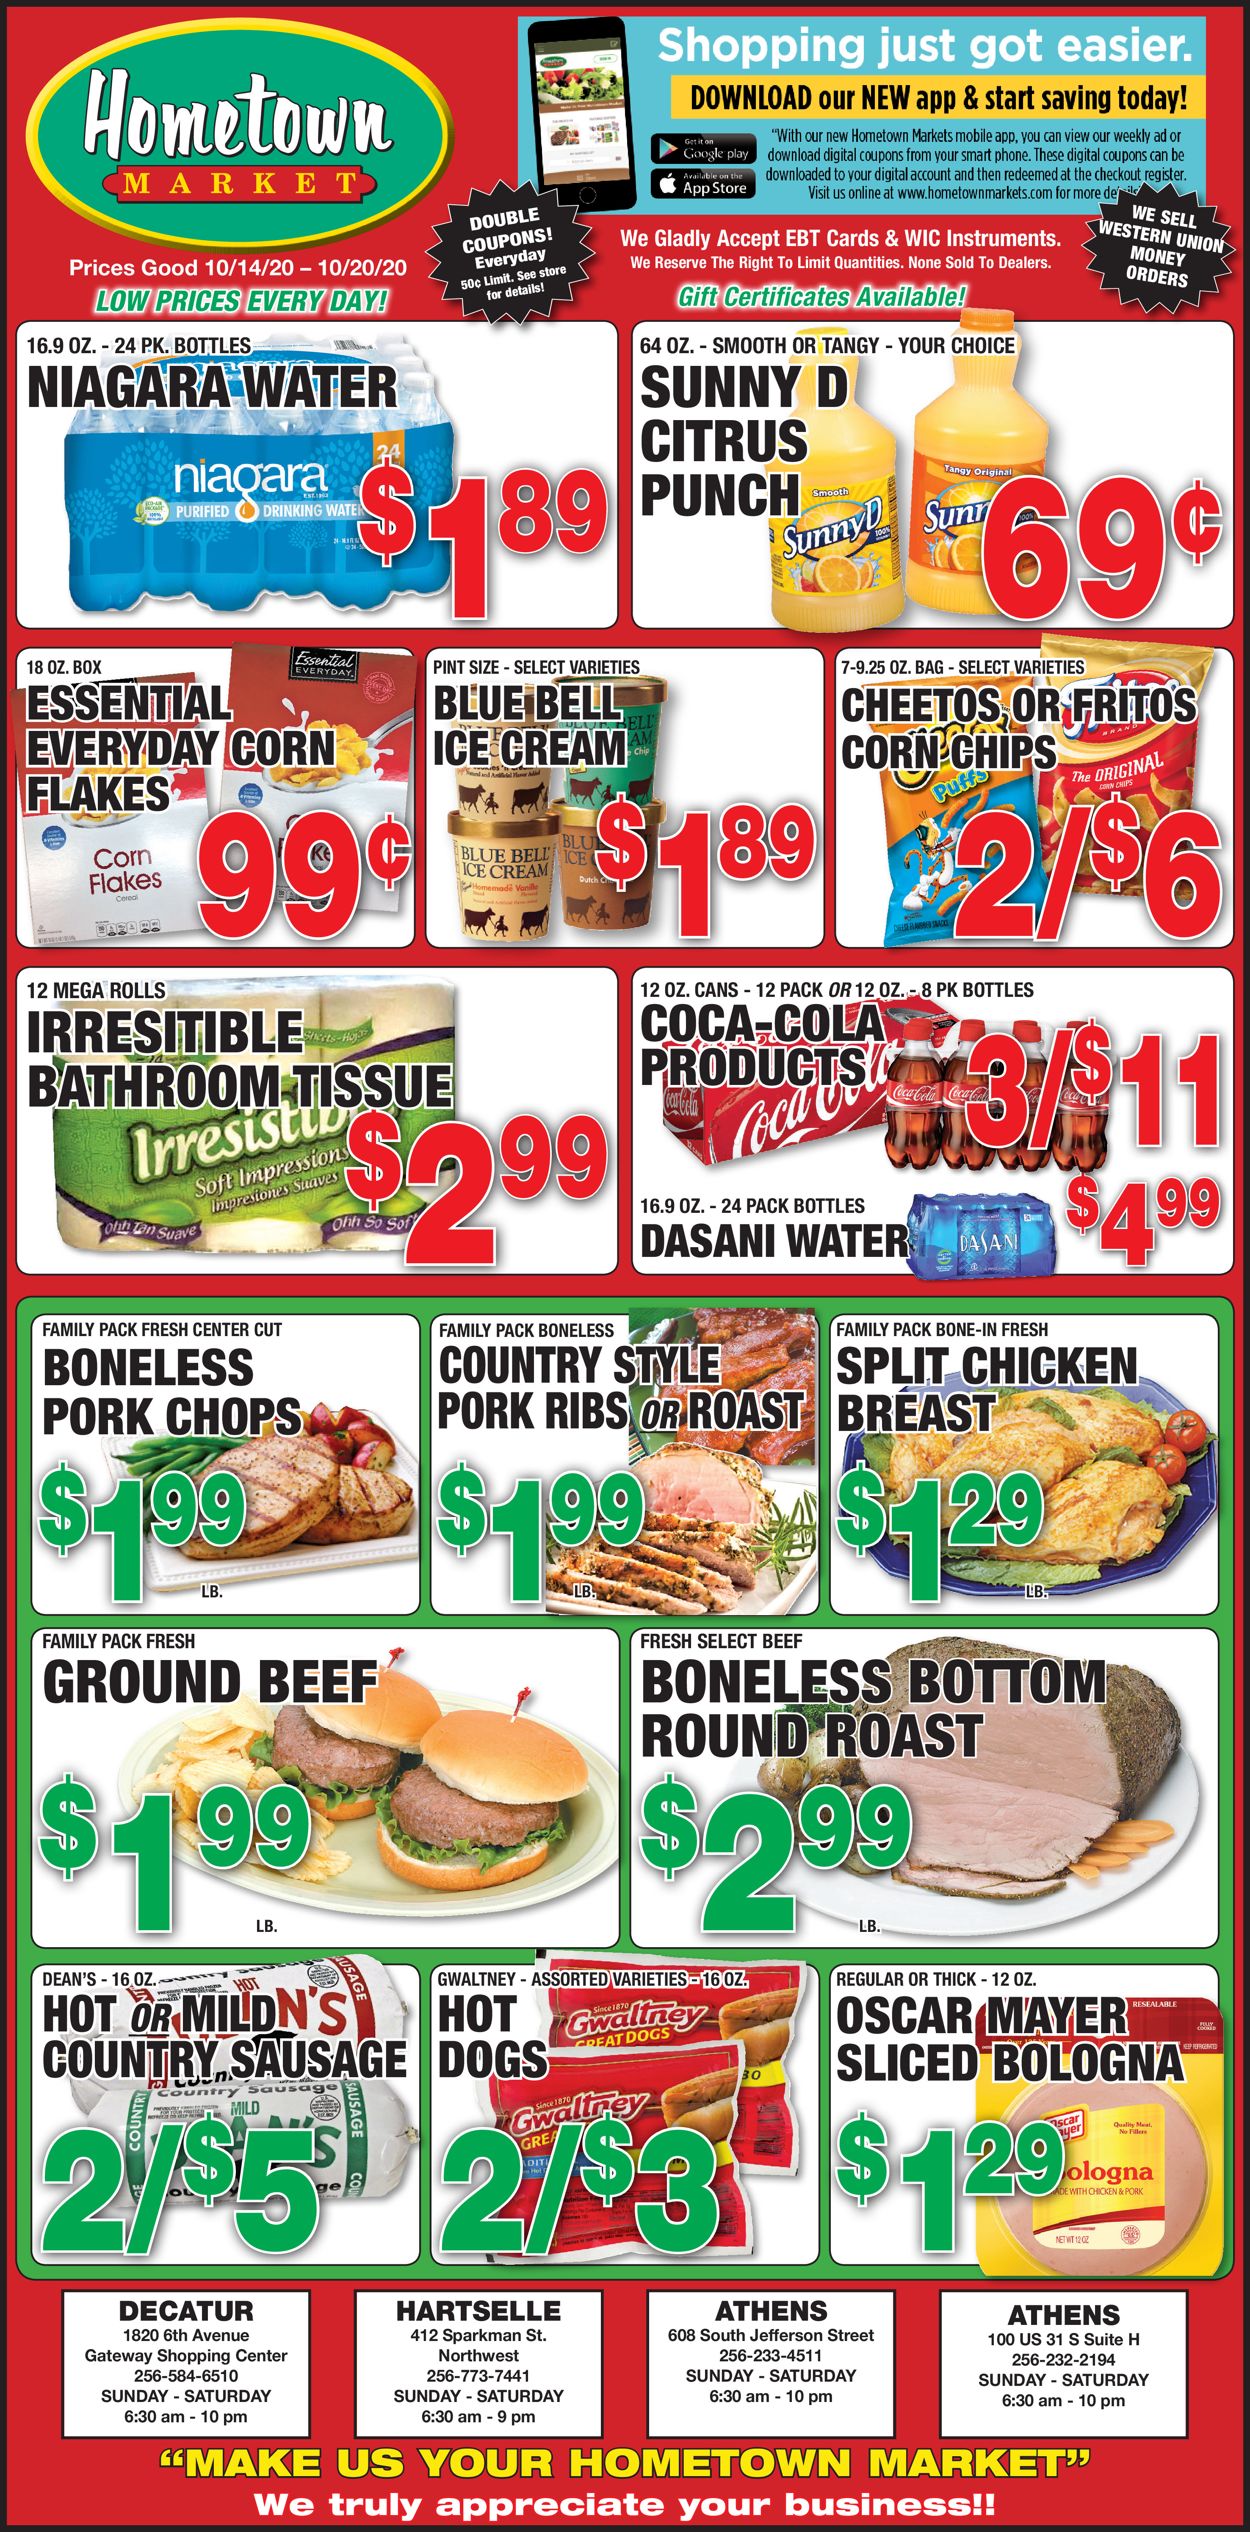 Hometown Market Current weekly ad 10/14 - 10/20/2020 - frequent-ads.com